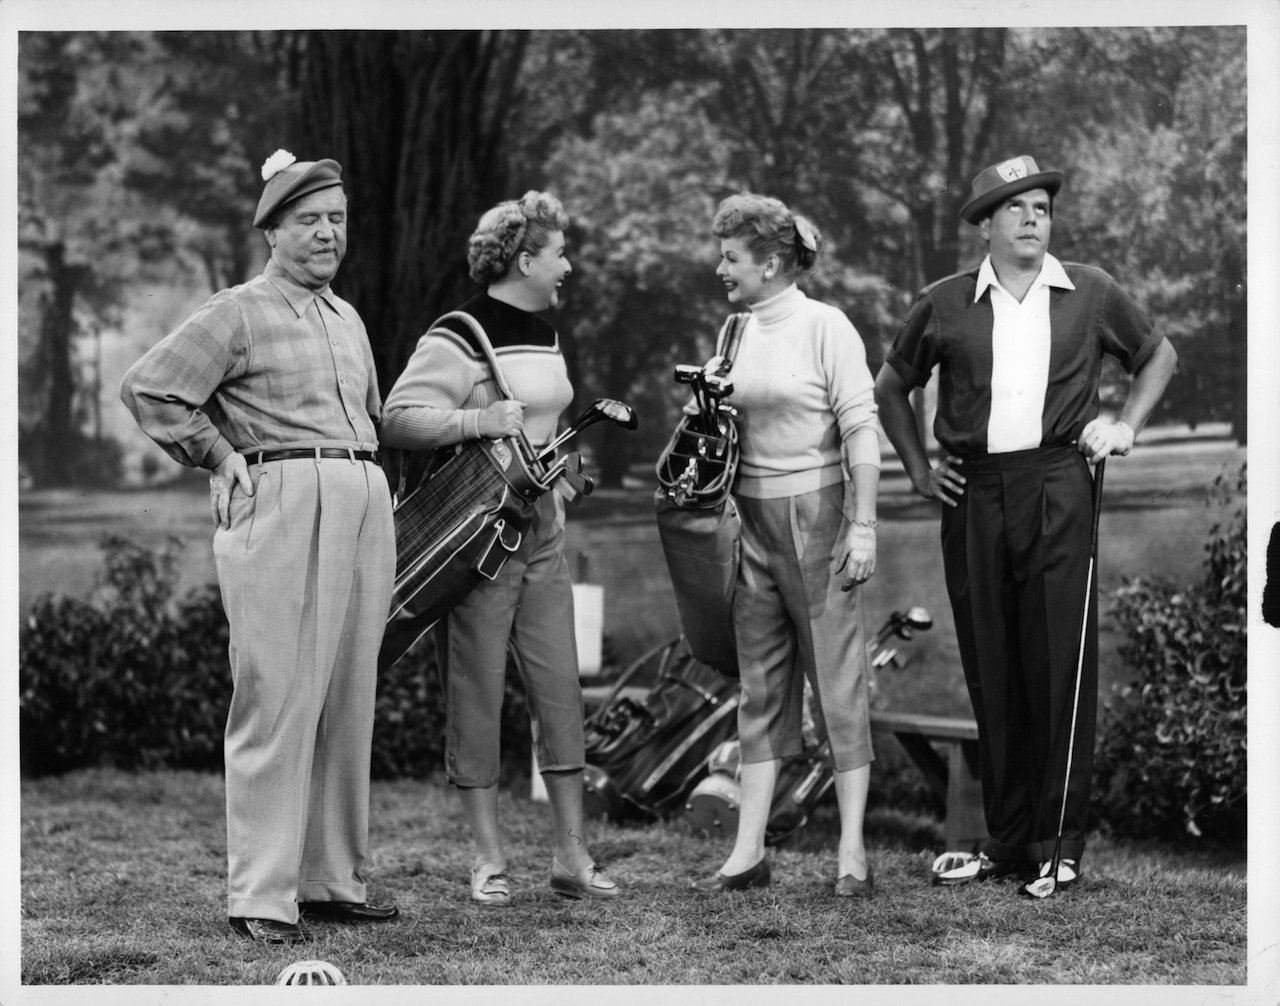 William Frawley, Vivian Vance, Lucille Ball, and Desi Arnaz out golfing in the television series 'I Love Lucy'